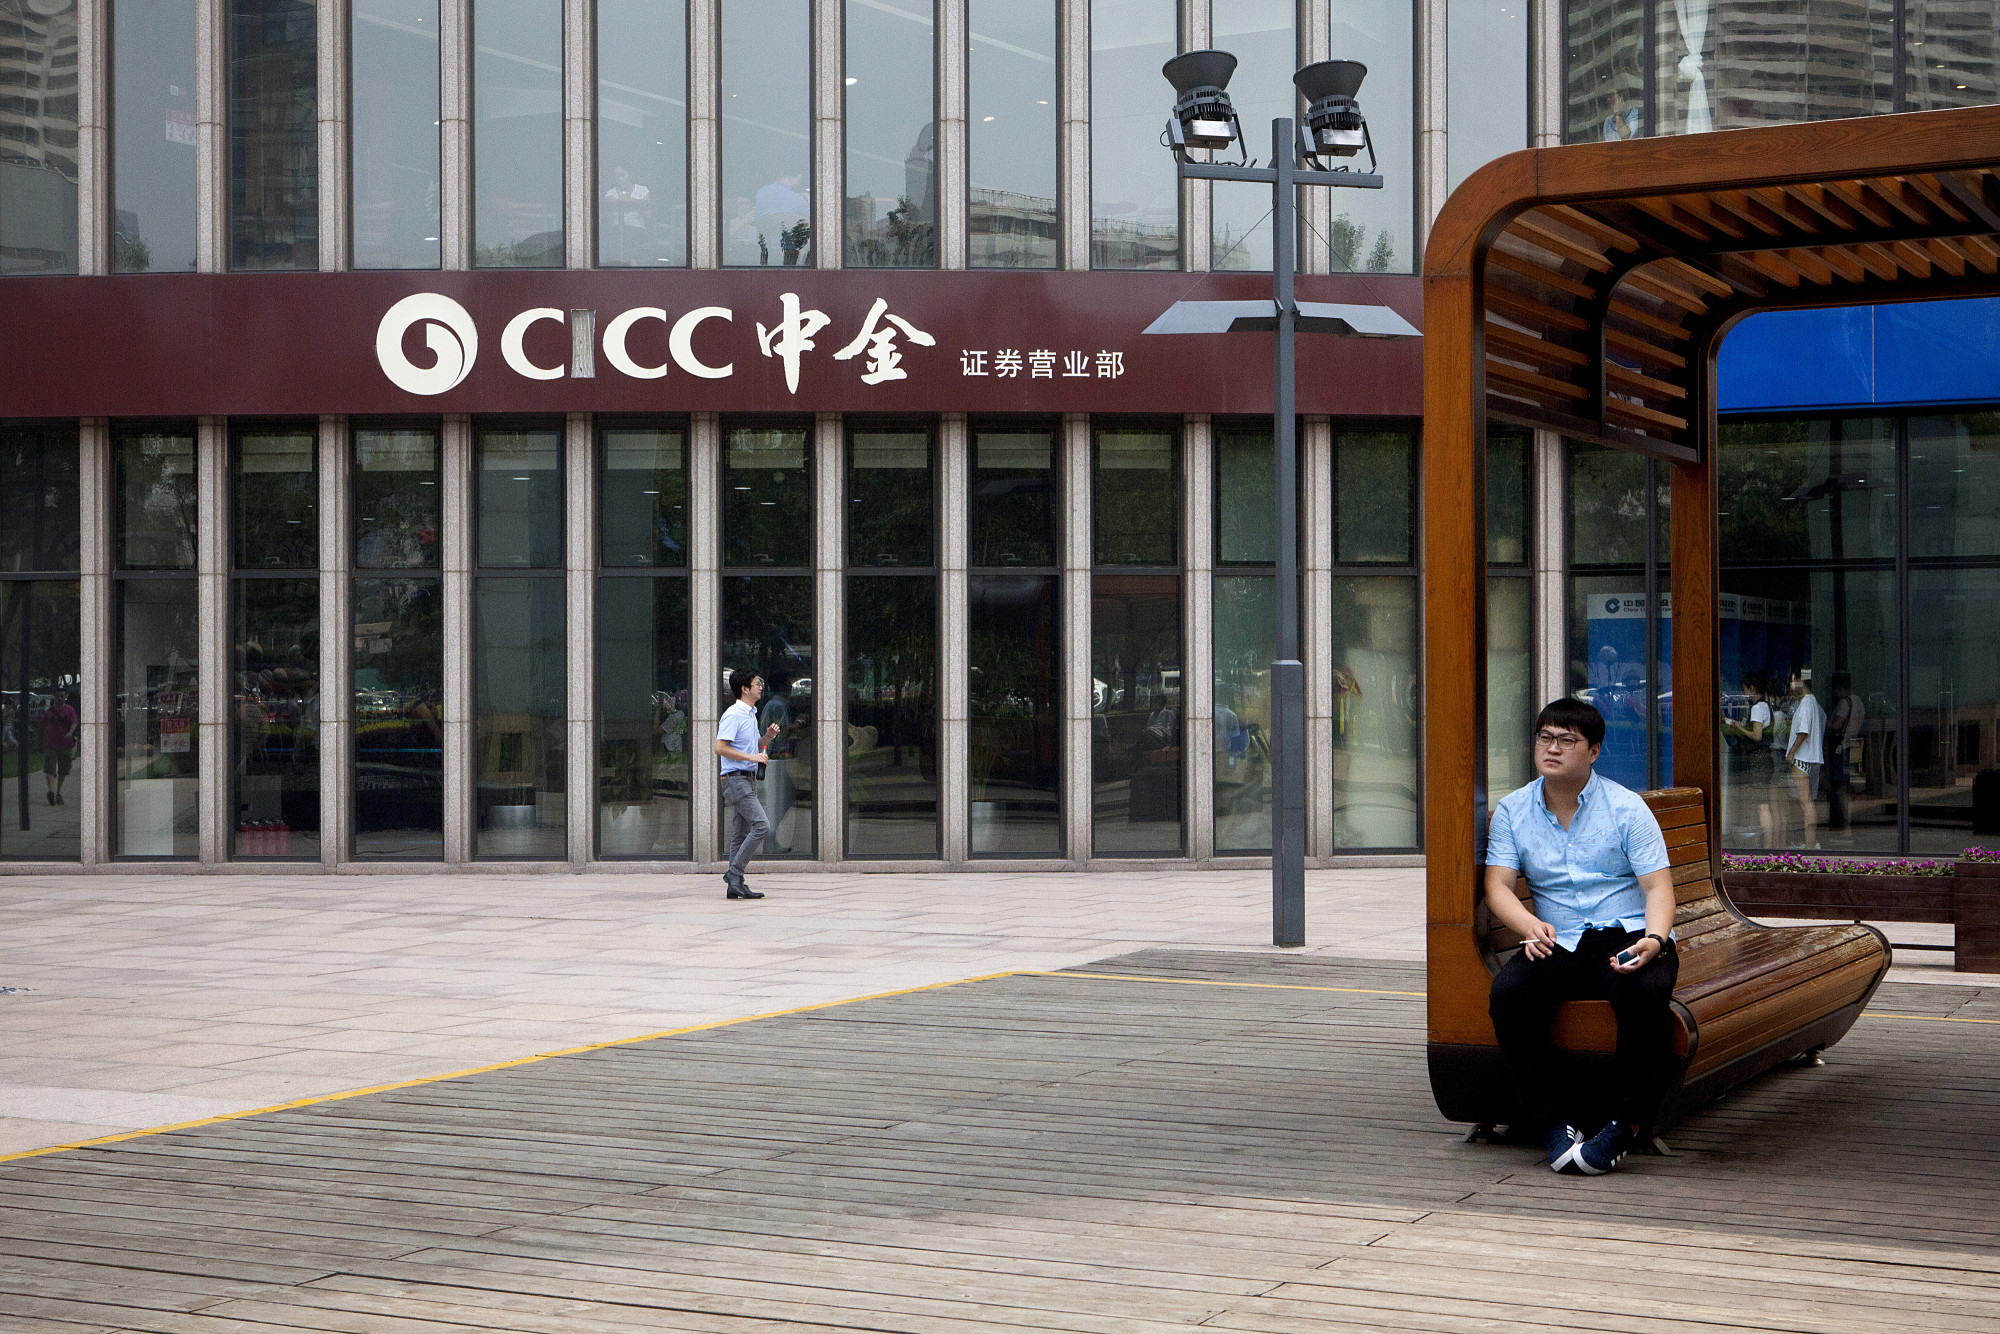 Shares of CICC jumped by a record after it said Tencent is paying HK$2.9 billion ($372 million) for roughly 5 percent of China’s oldest investment bank.
